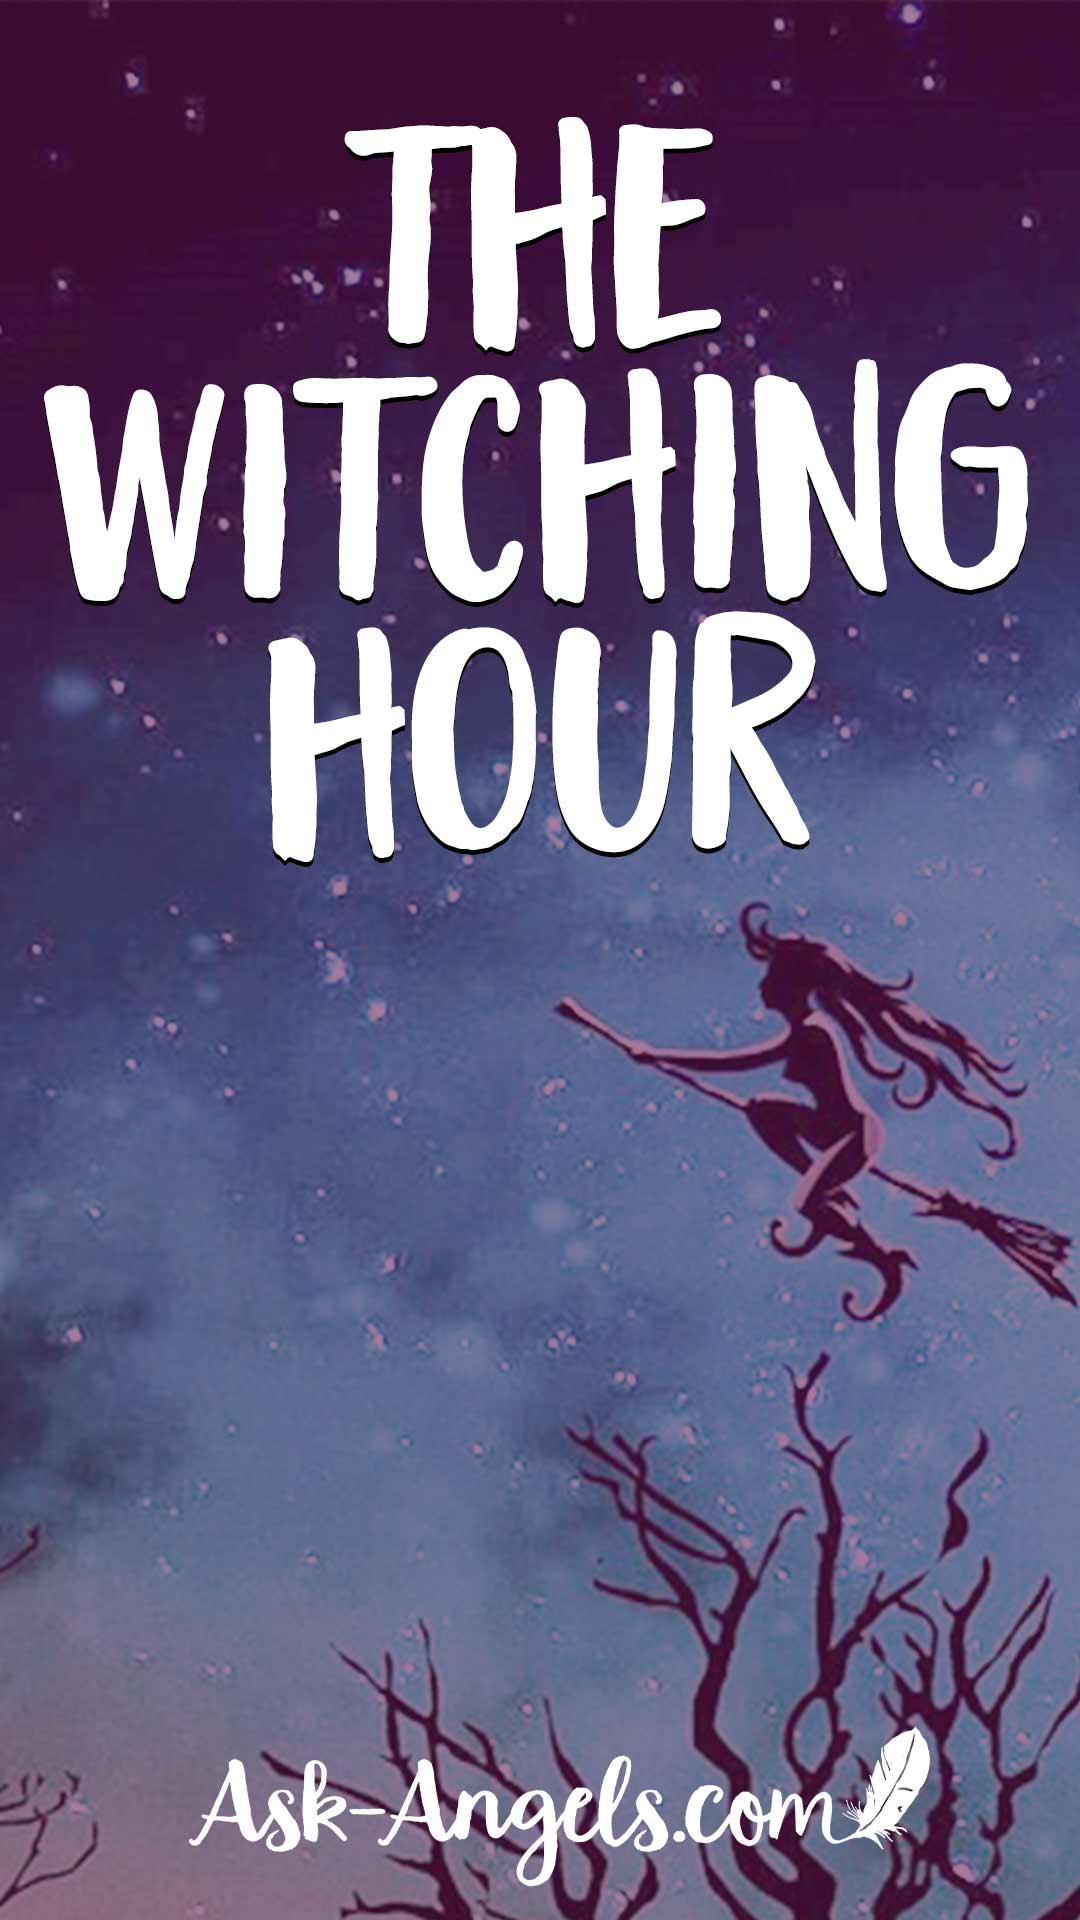 The Witching Hour ... Between 2AM and 4 AM. What does it mean?